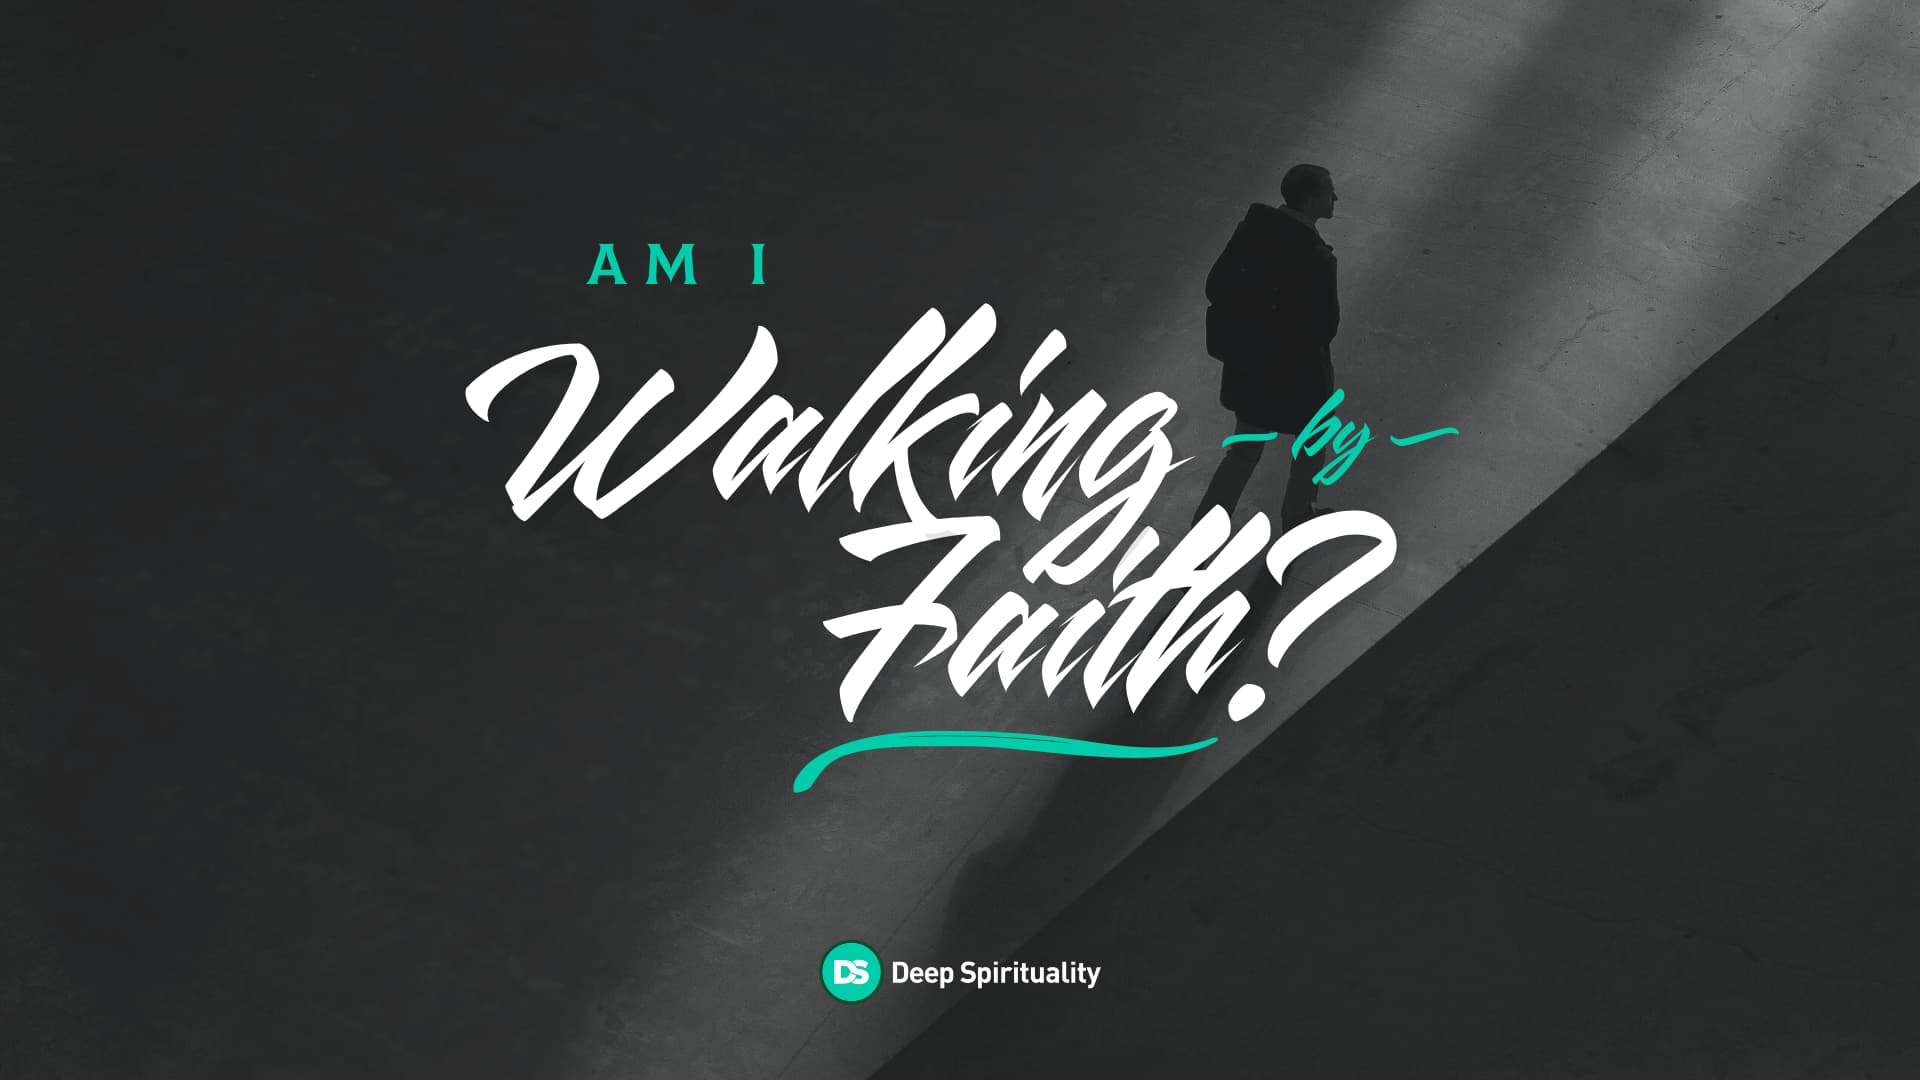 How Do I Know if I’m Walking by Faith? 19